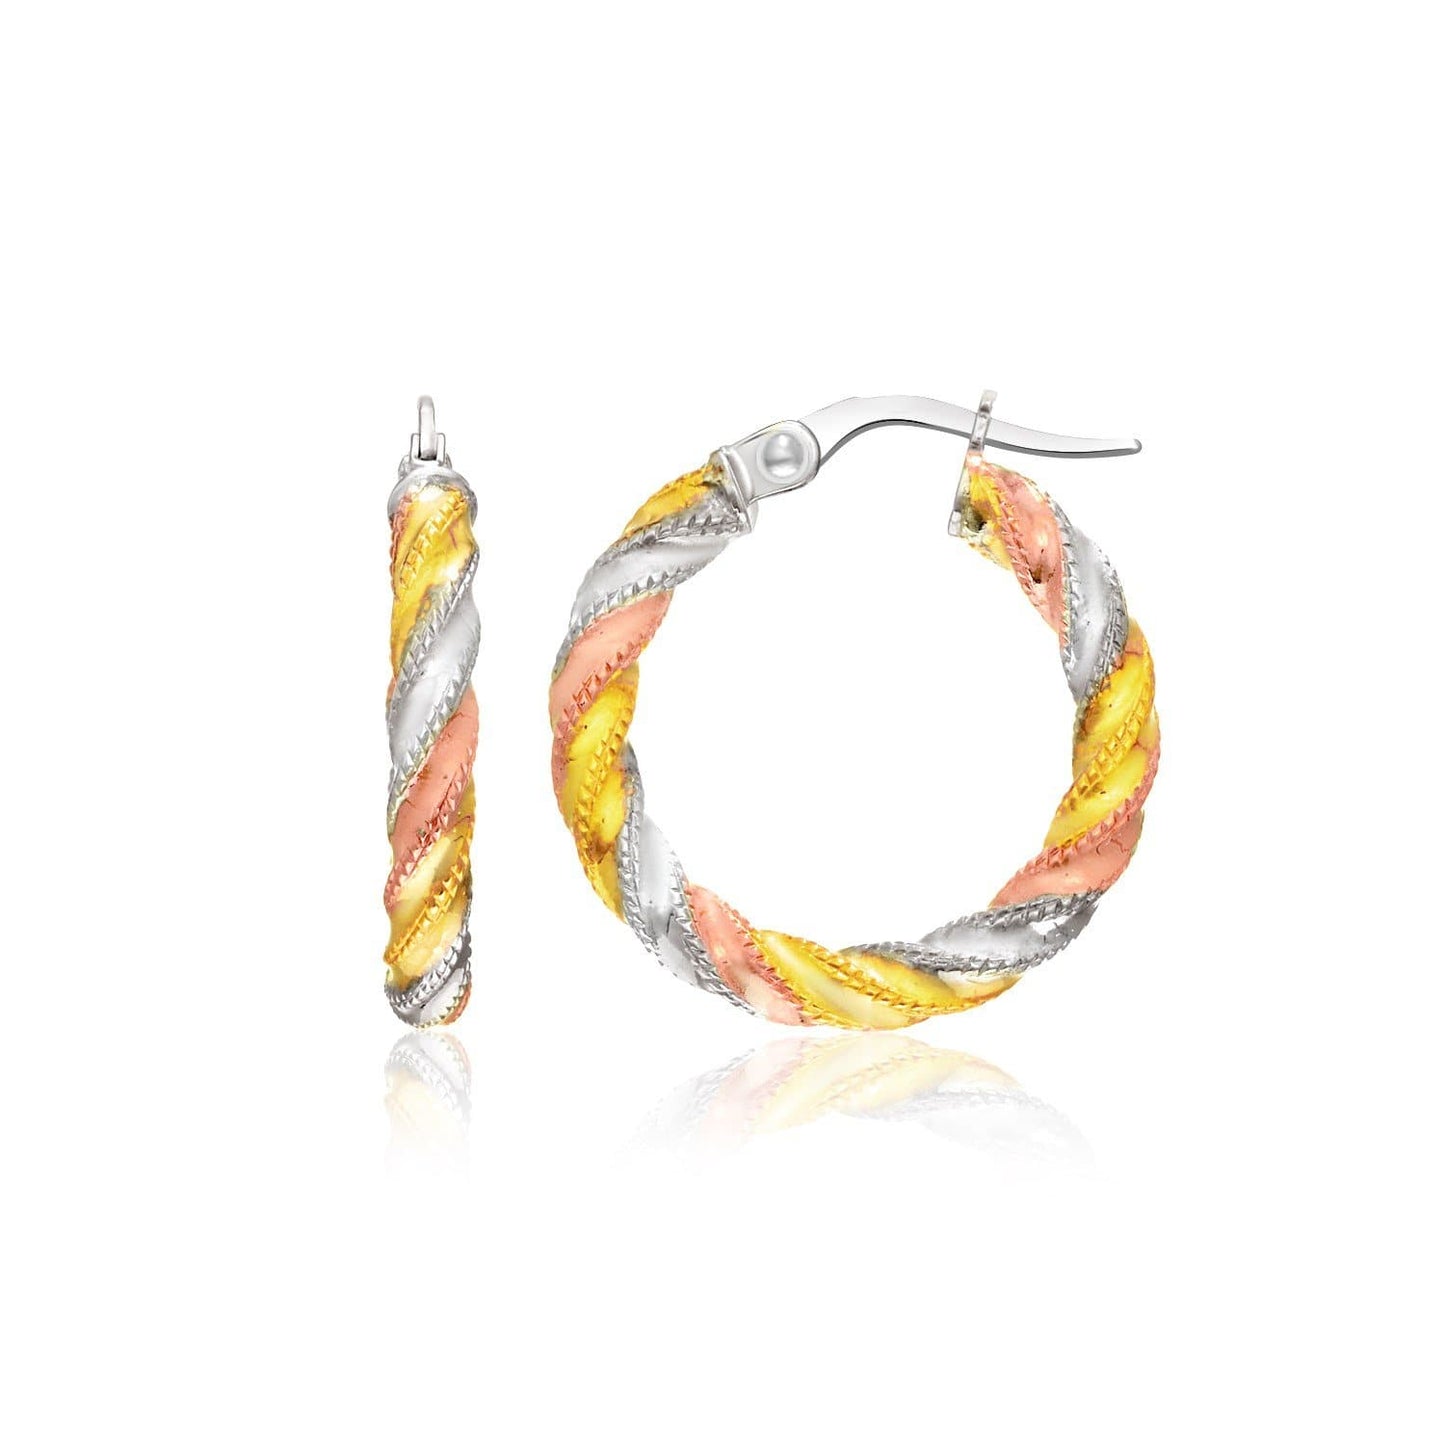 14k Tri-Color Gold Hoop Earrings with a Spiral Design